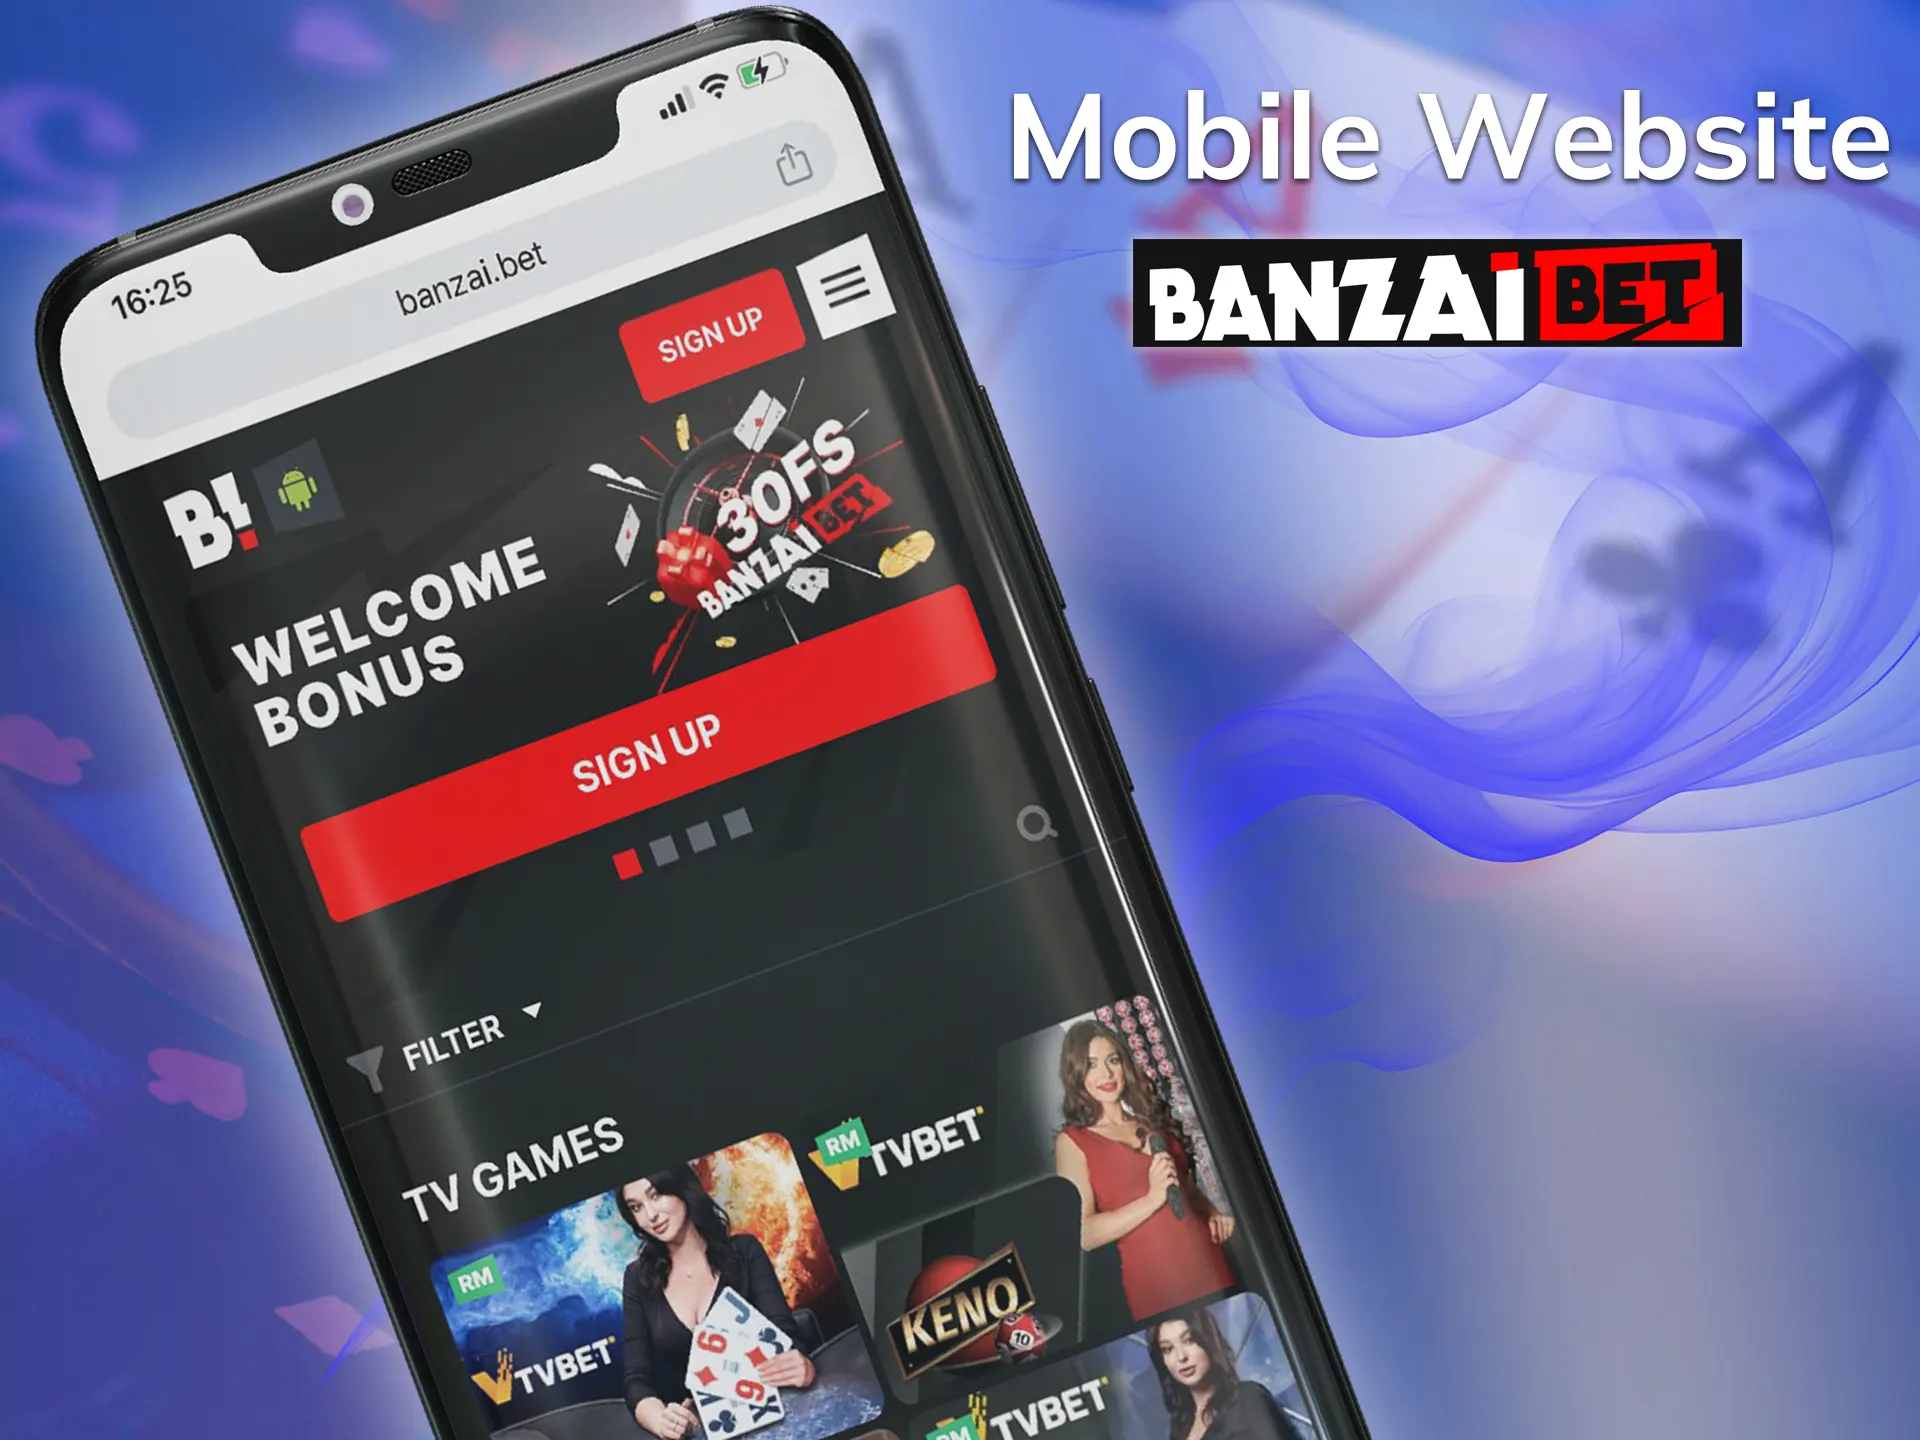 Visit the Banzai Bet online casino website from your smartphone and play your favourite casino games.